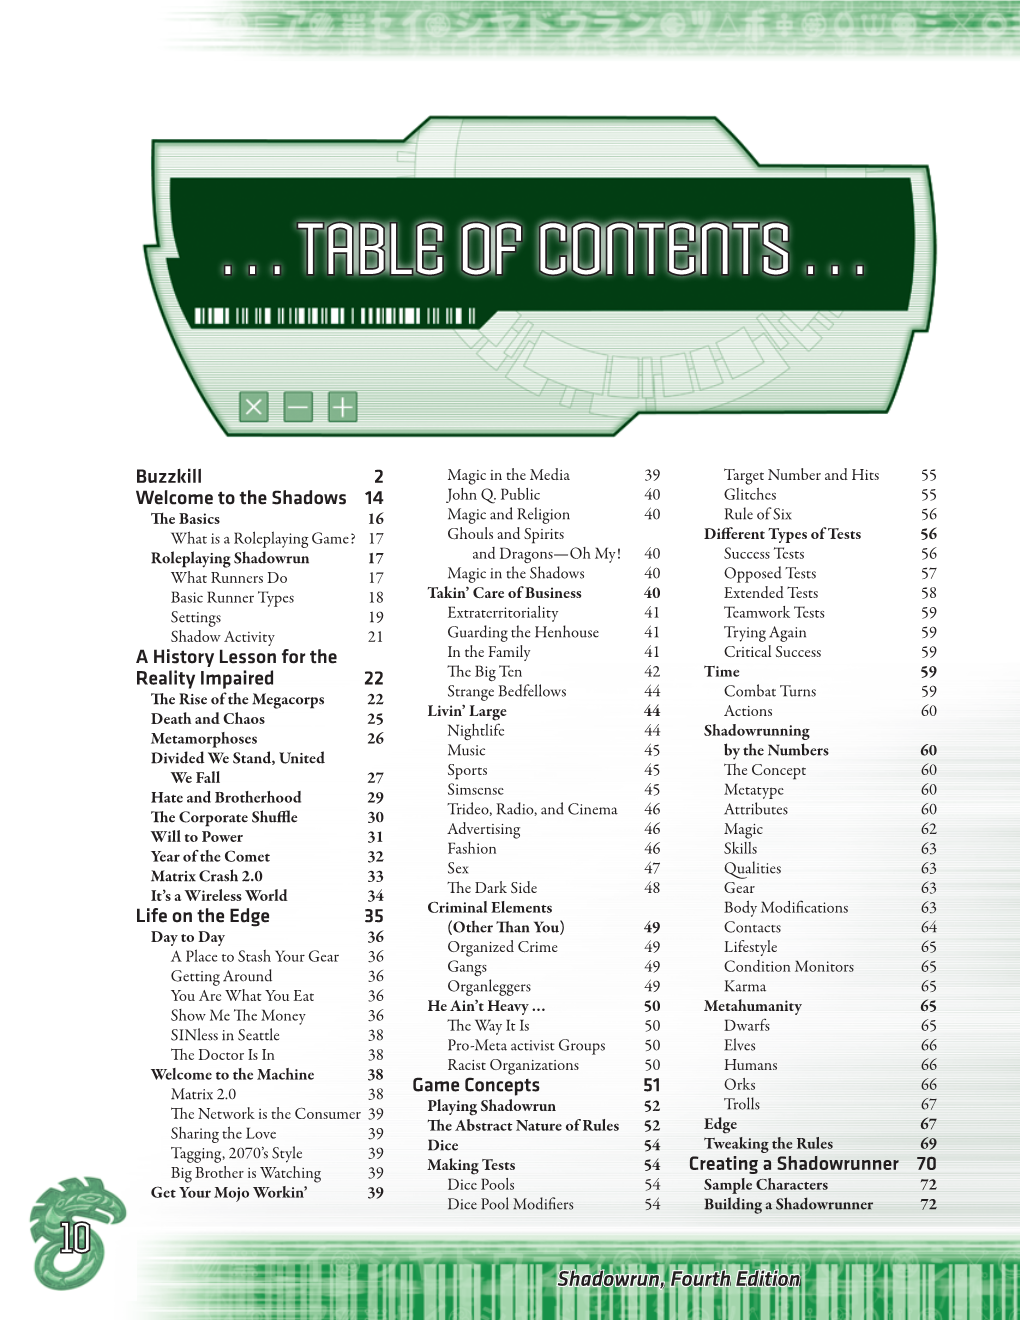 Shadowrun Fourth Edition: Table of Contents